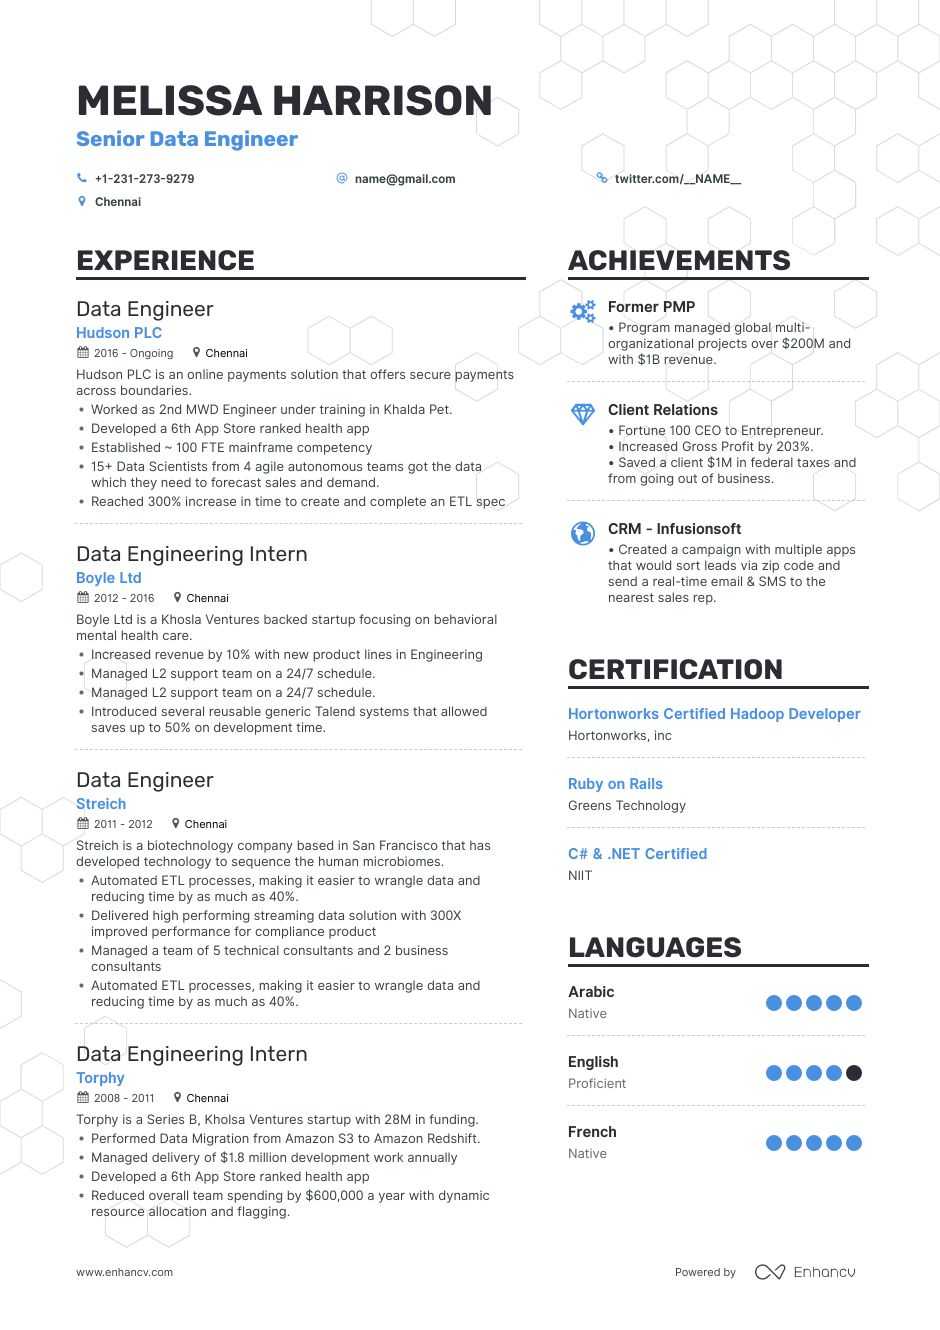 cv-format-for-engineers-cv-examples-for-engineers-click-here-to